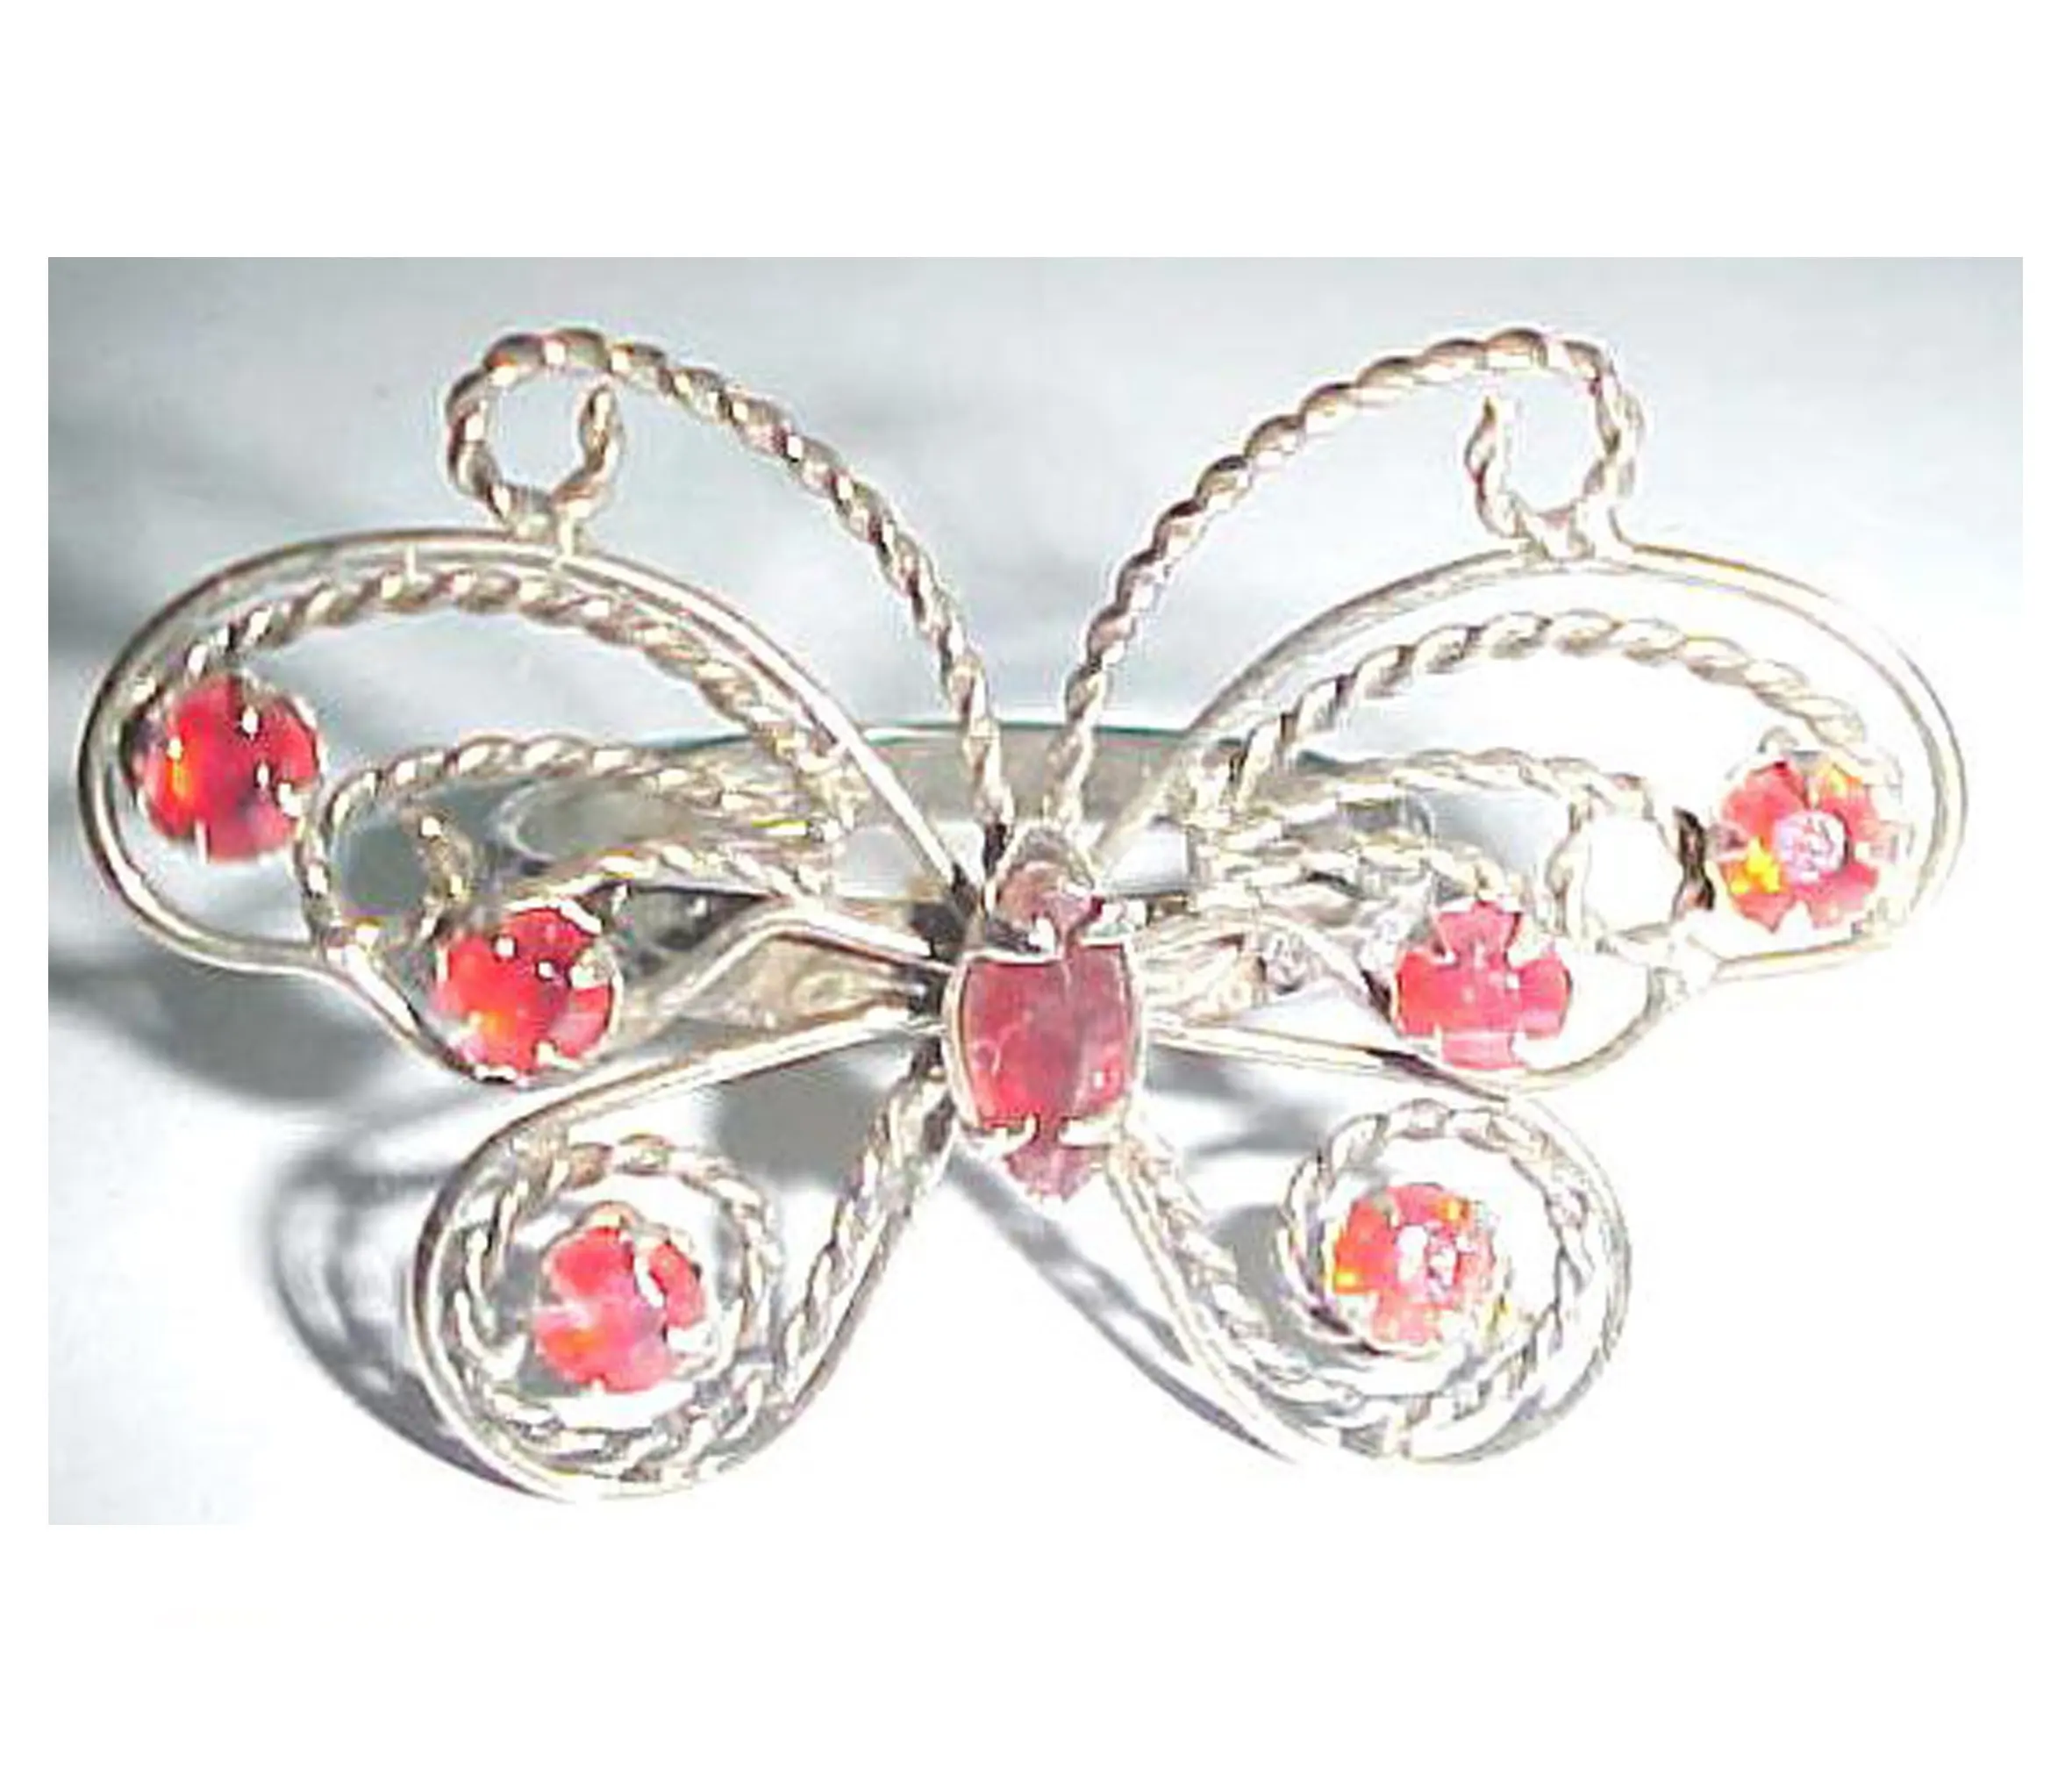 Crystal Butterfly Napkin Ring Customize Design Tabletop Decorative Napkin Holder For Wedding Table Centerpiece